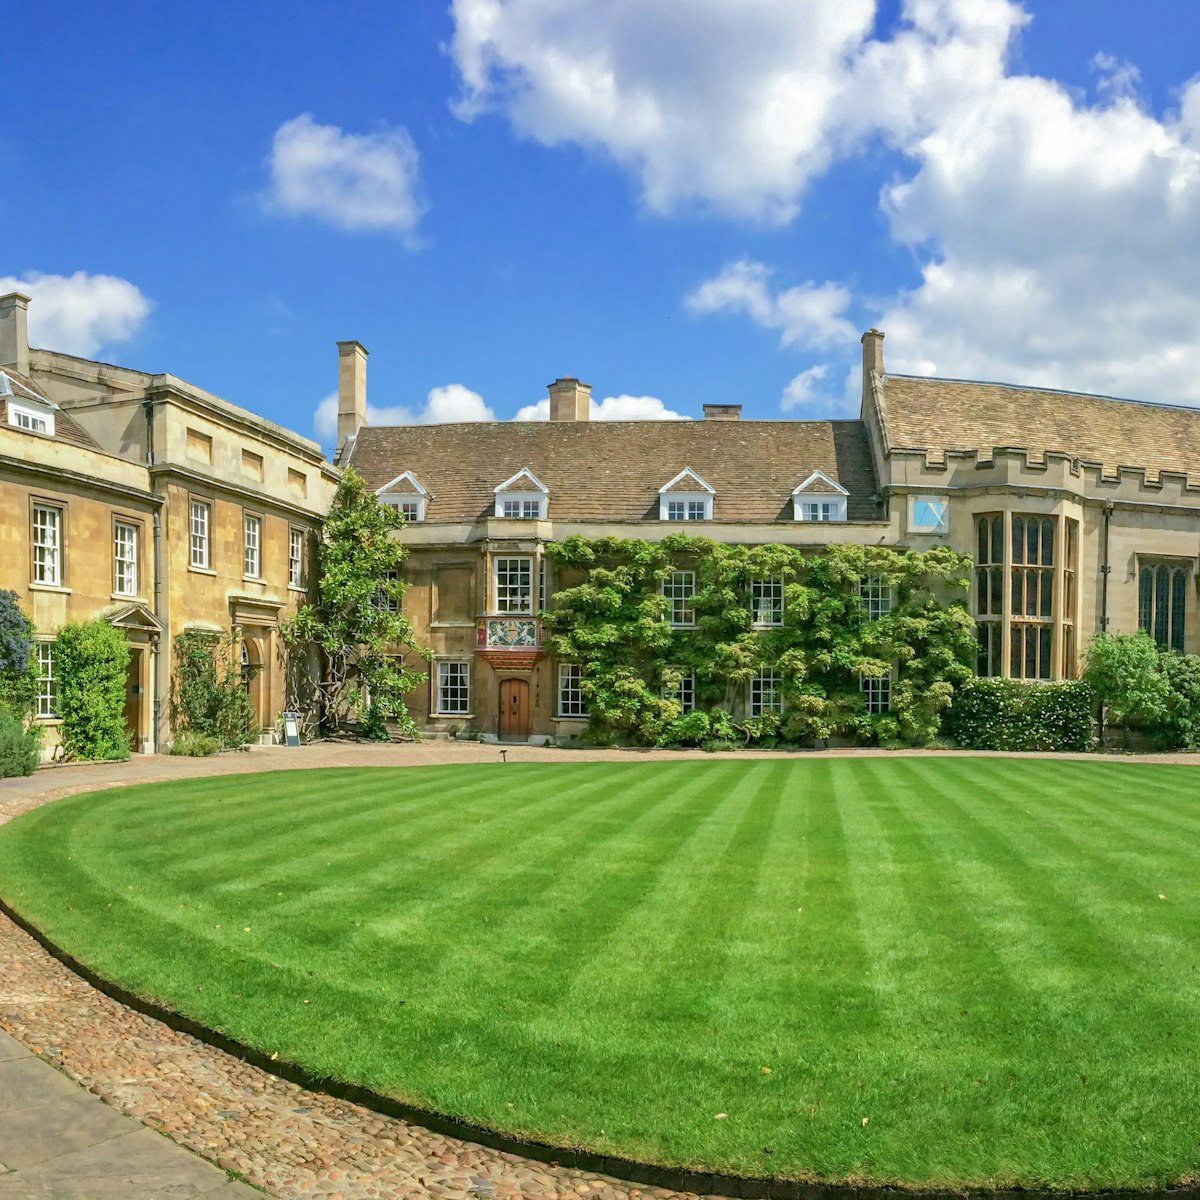 First court at Christ's college university of Cambridge, in Cambridge, UK